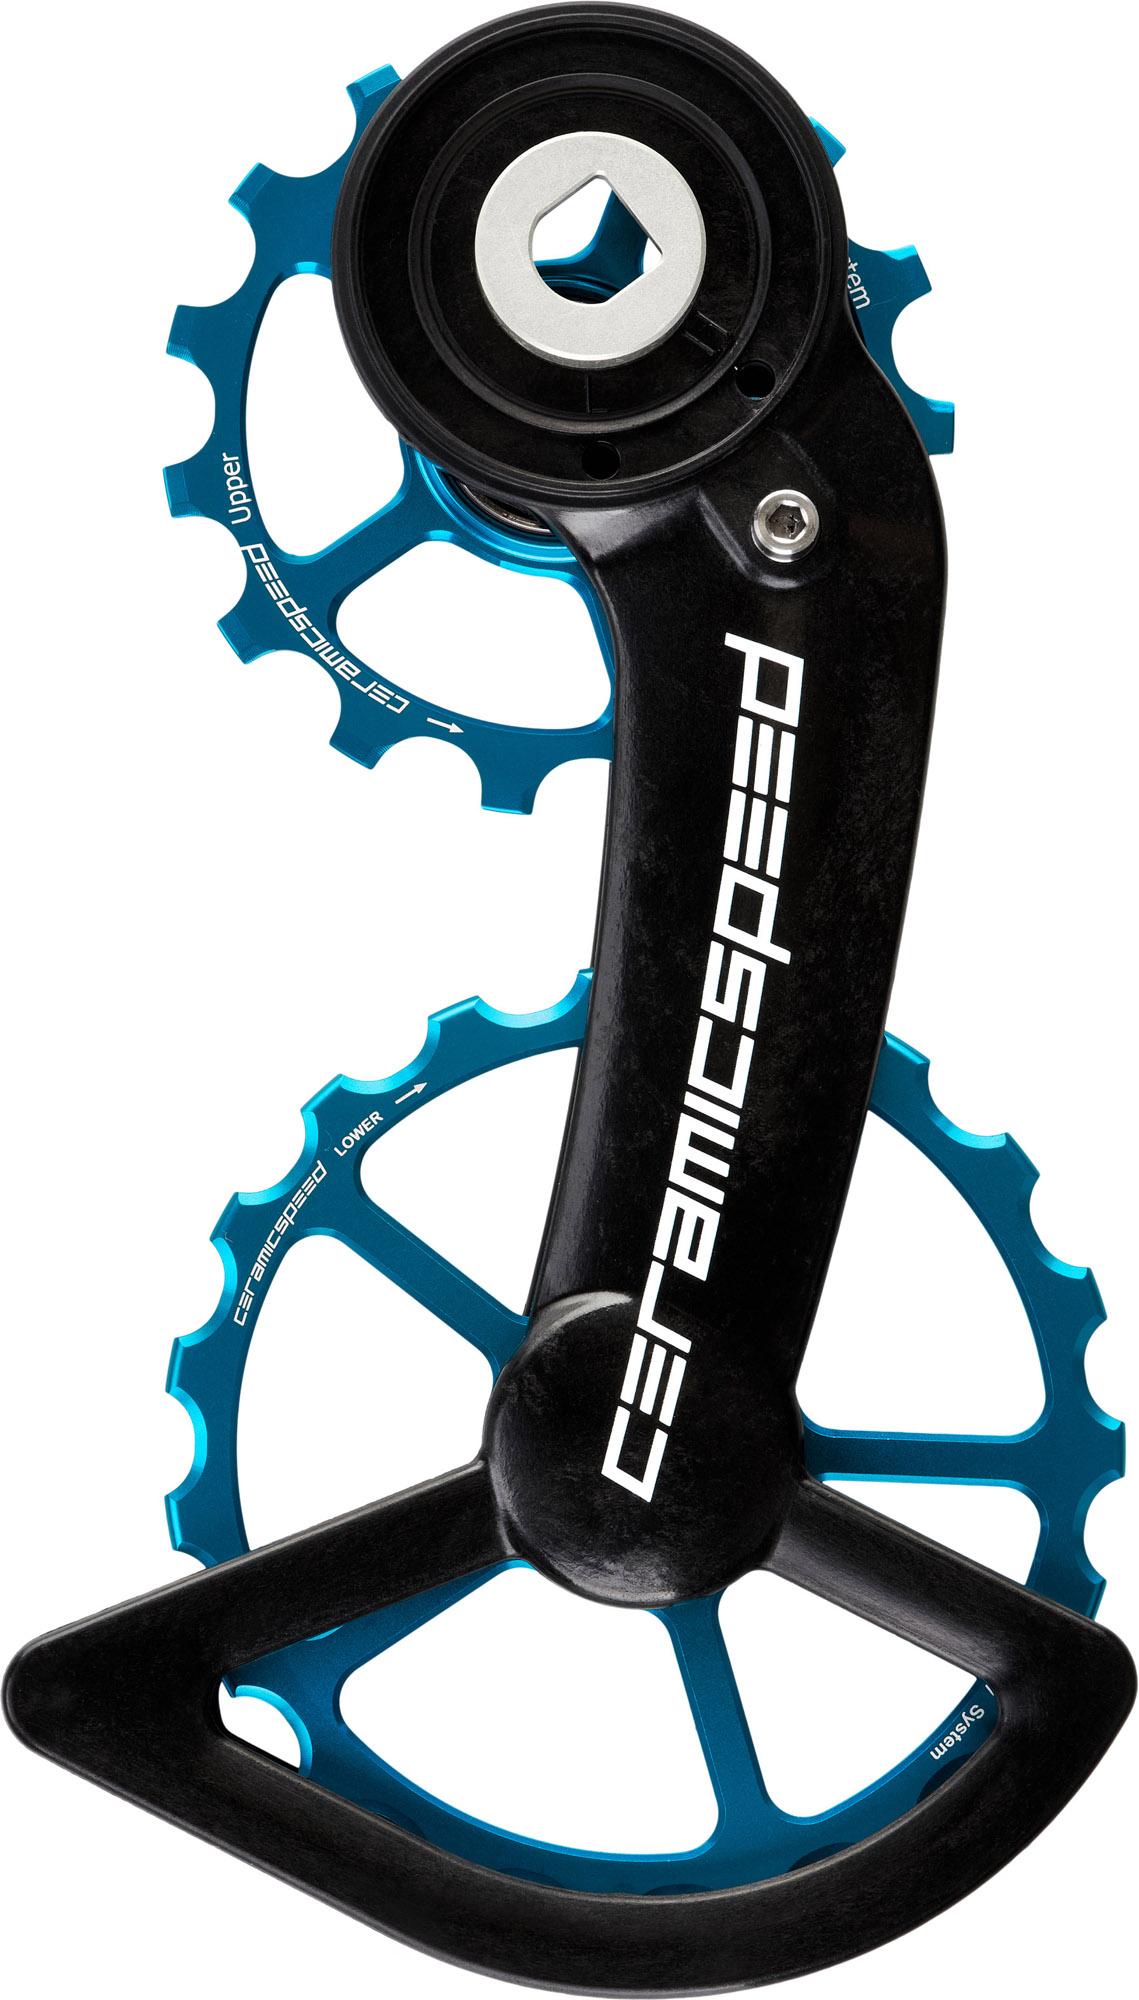 Ceramicspeed Ospw System Sram Red-force Axs  Blue